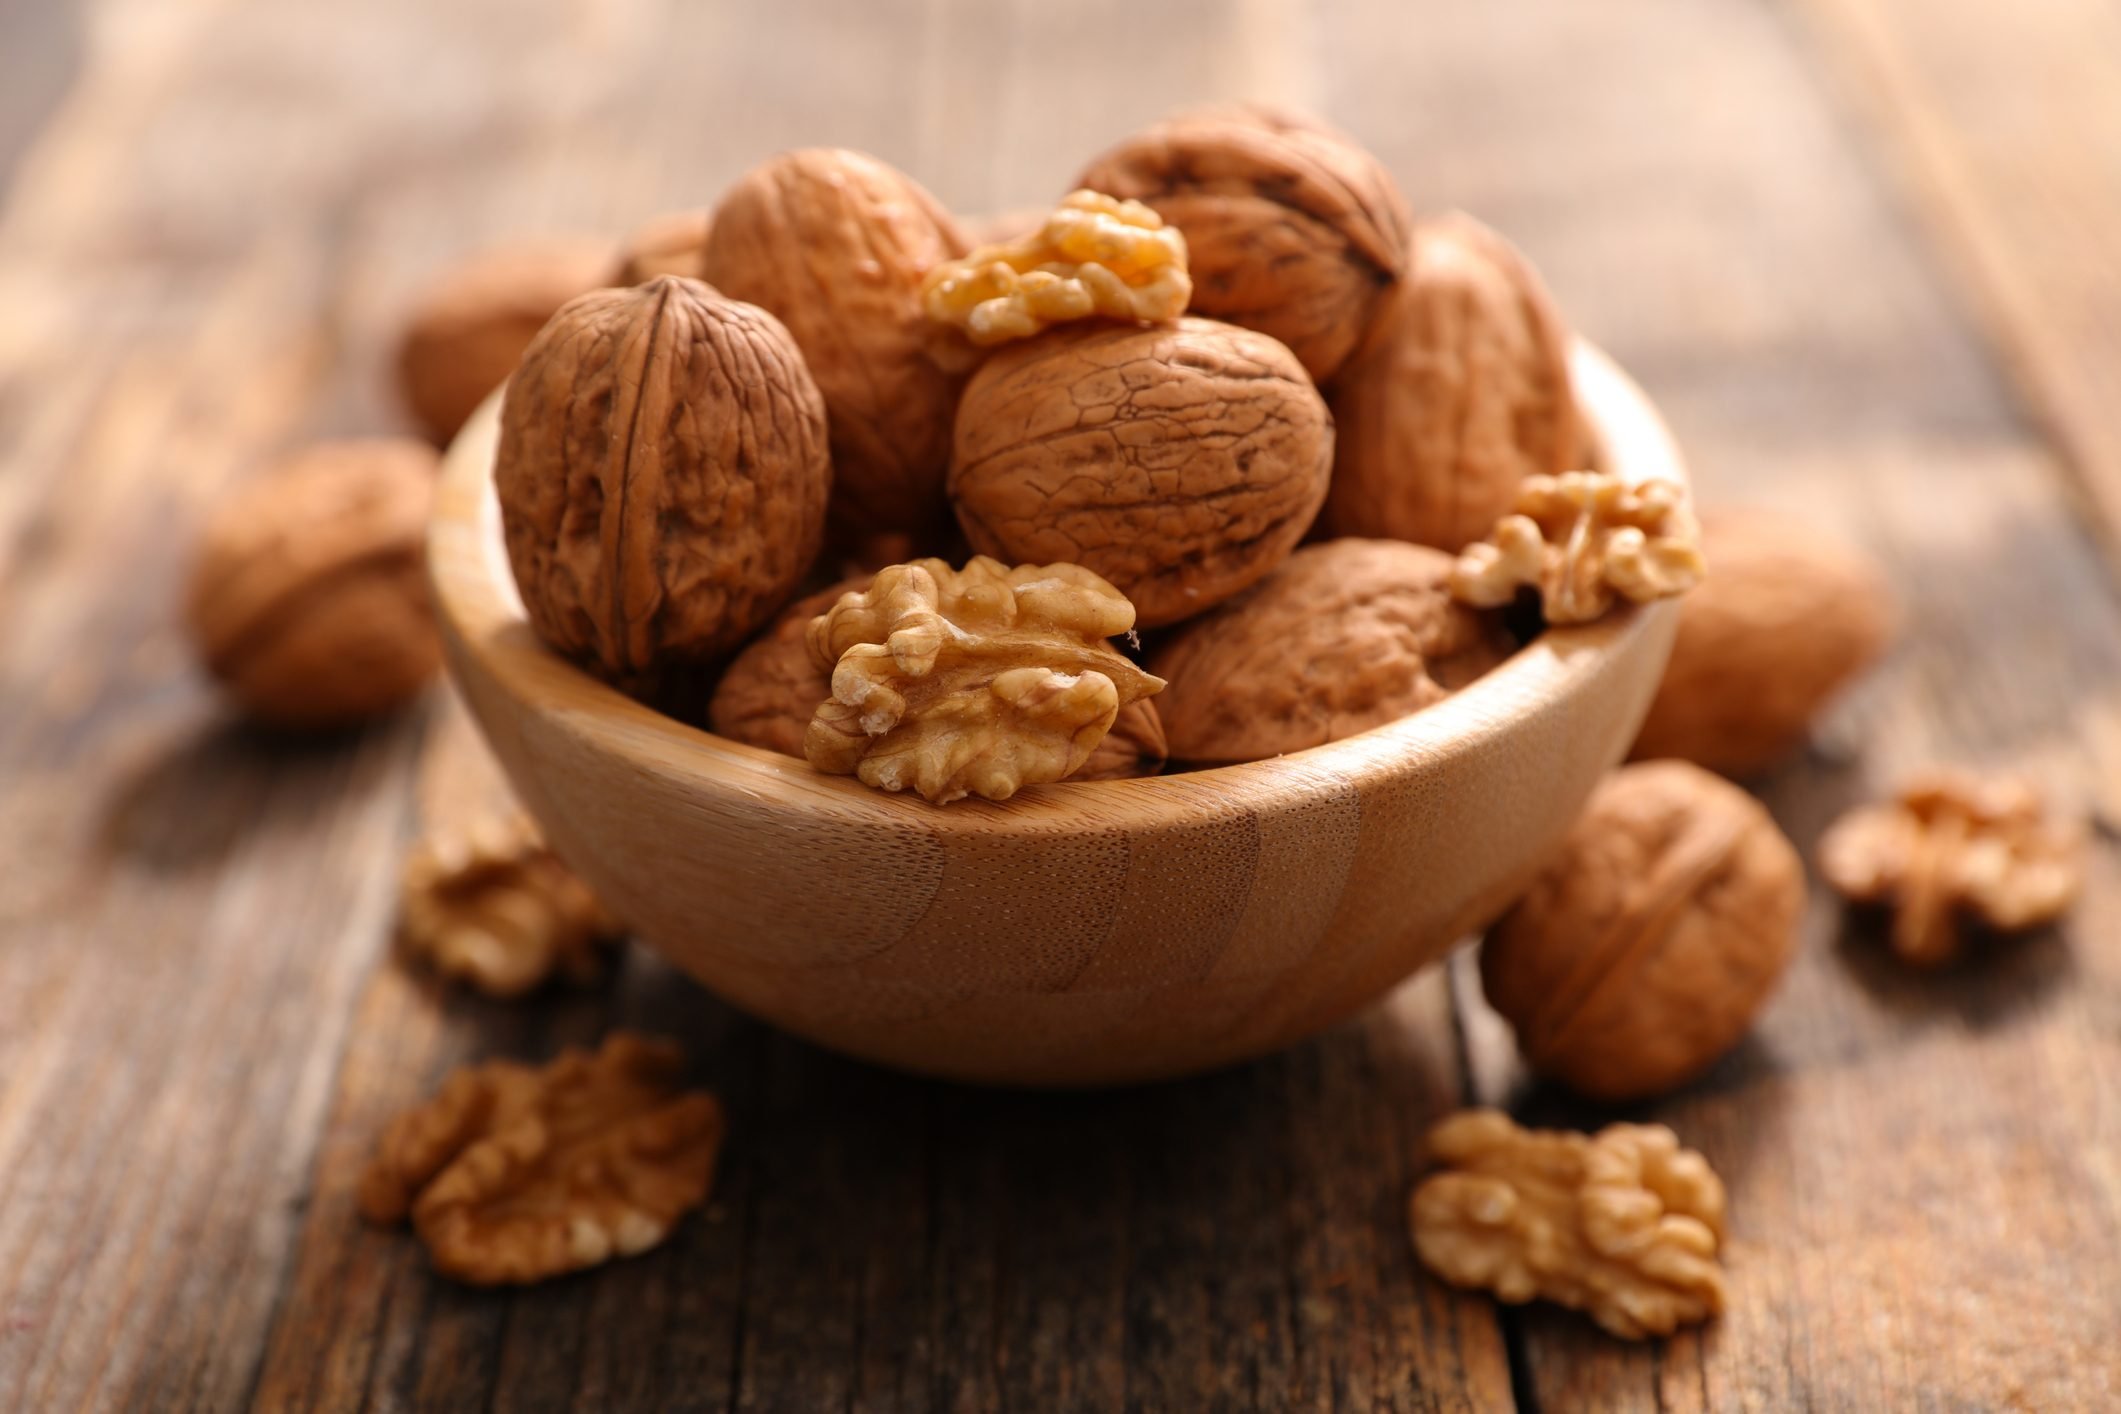 Should You Eat Walnuts? Here Are 12 Walnut Benefits to Know